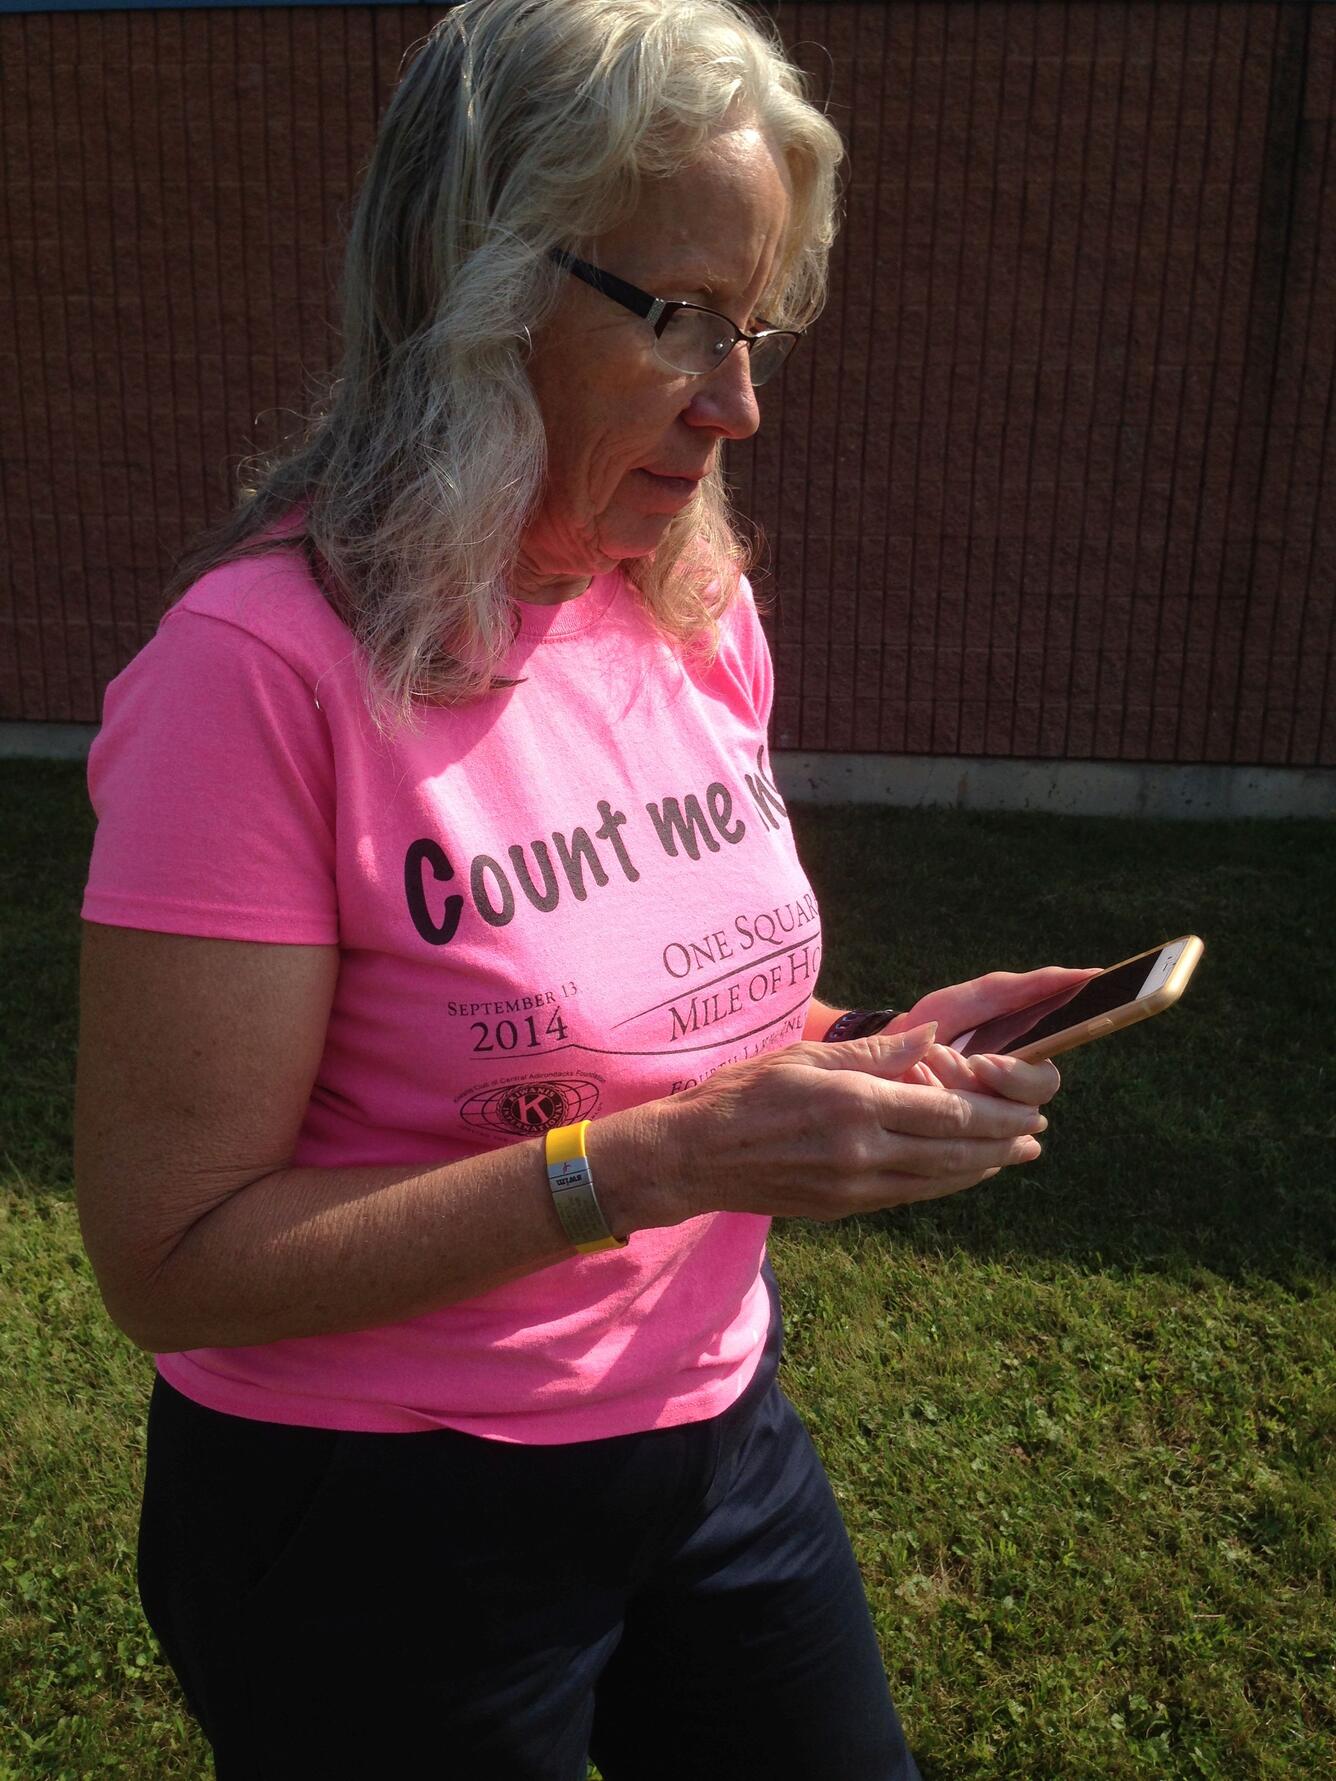 woman in pink shirt looking at cellphone